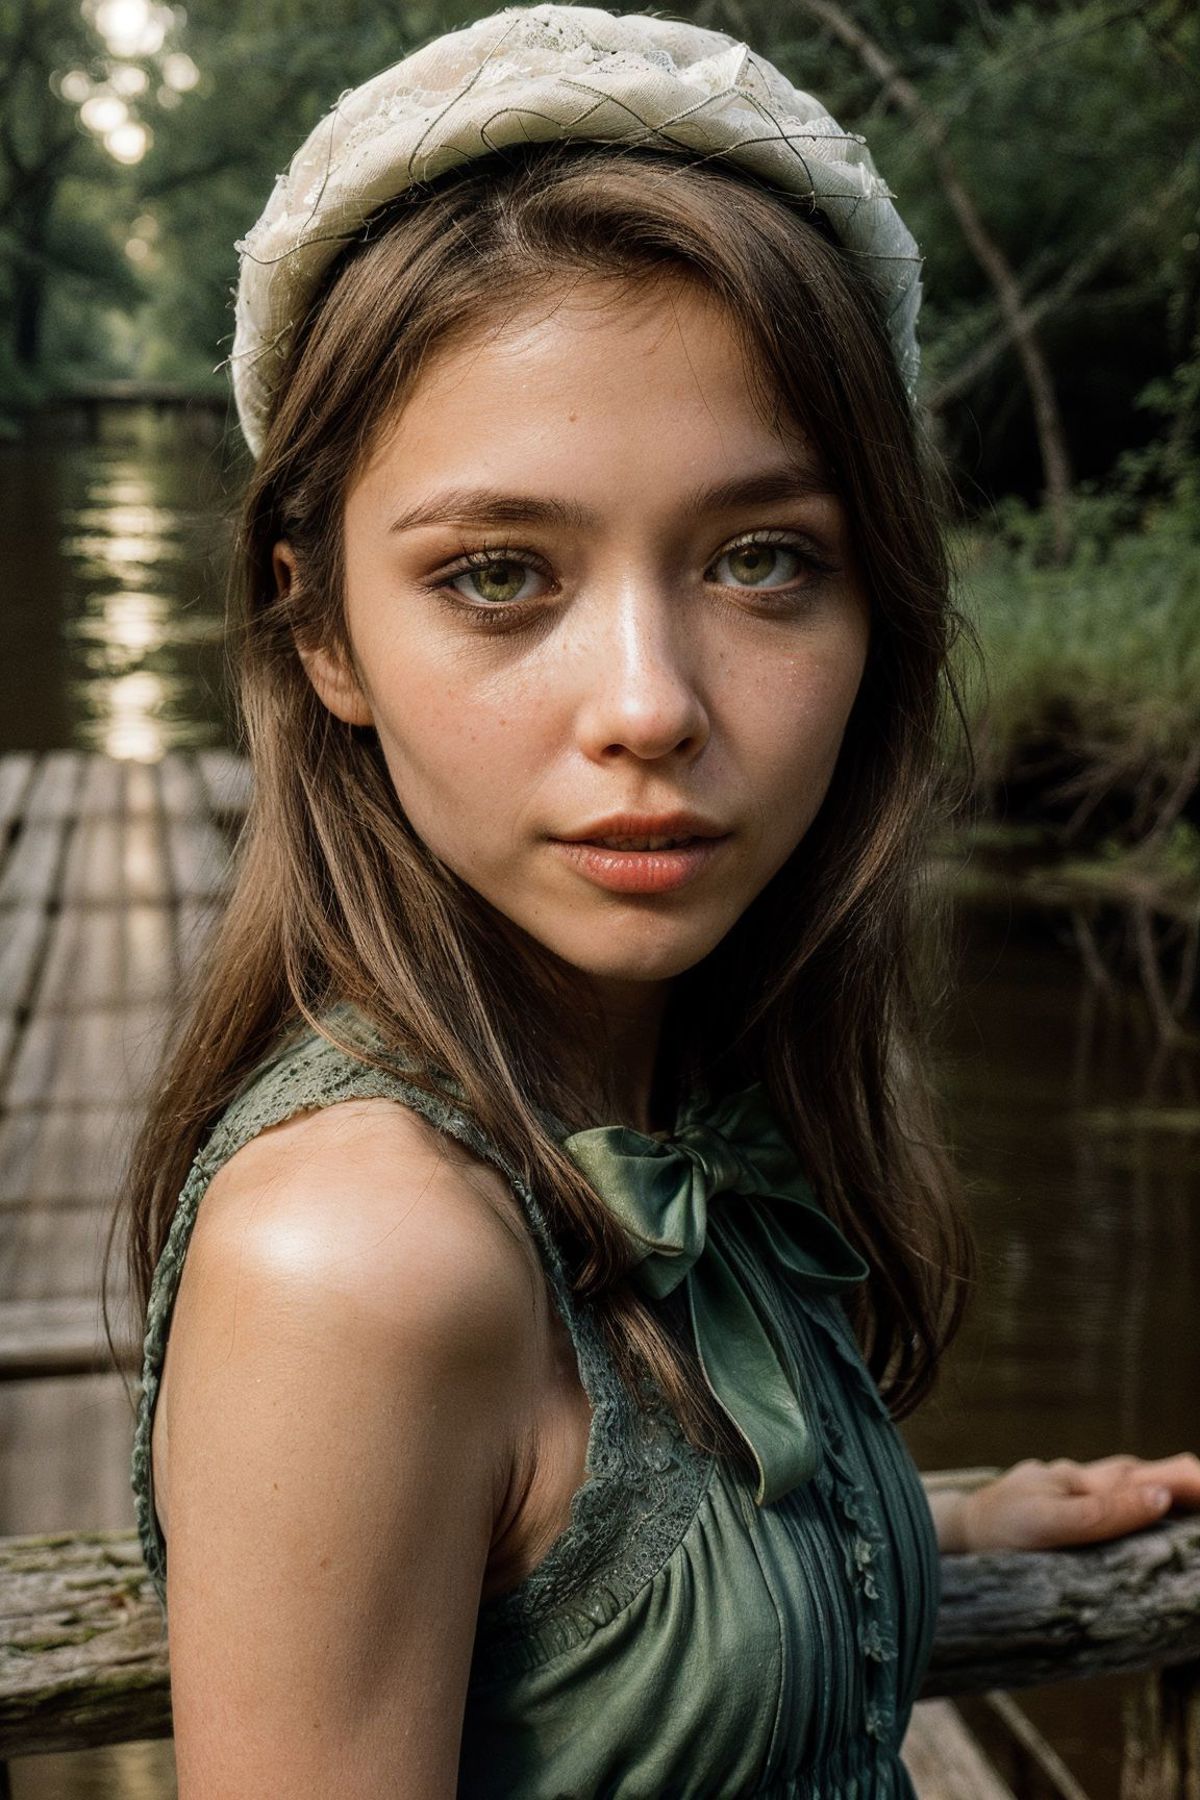 Mila Azul image by ManOfCulture